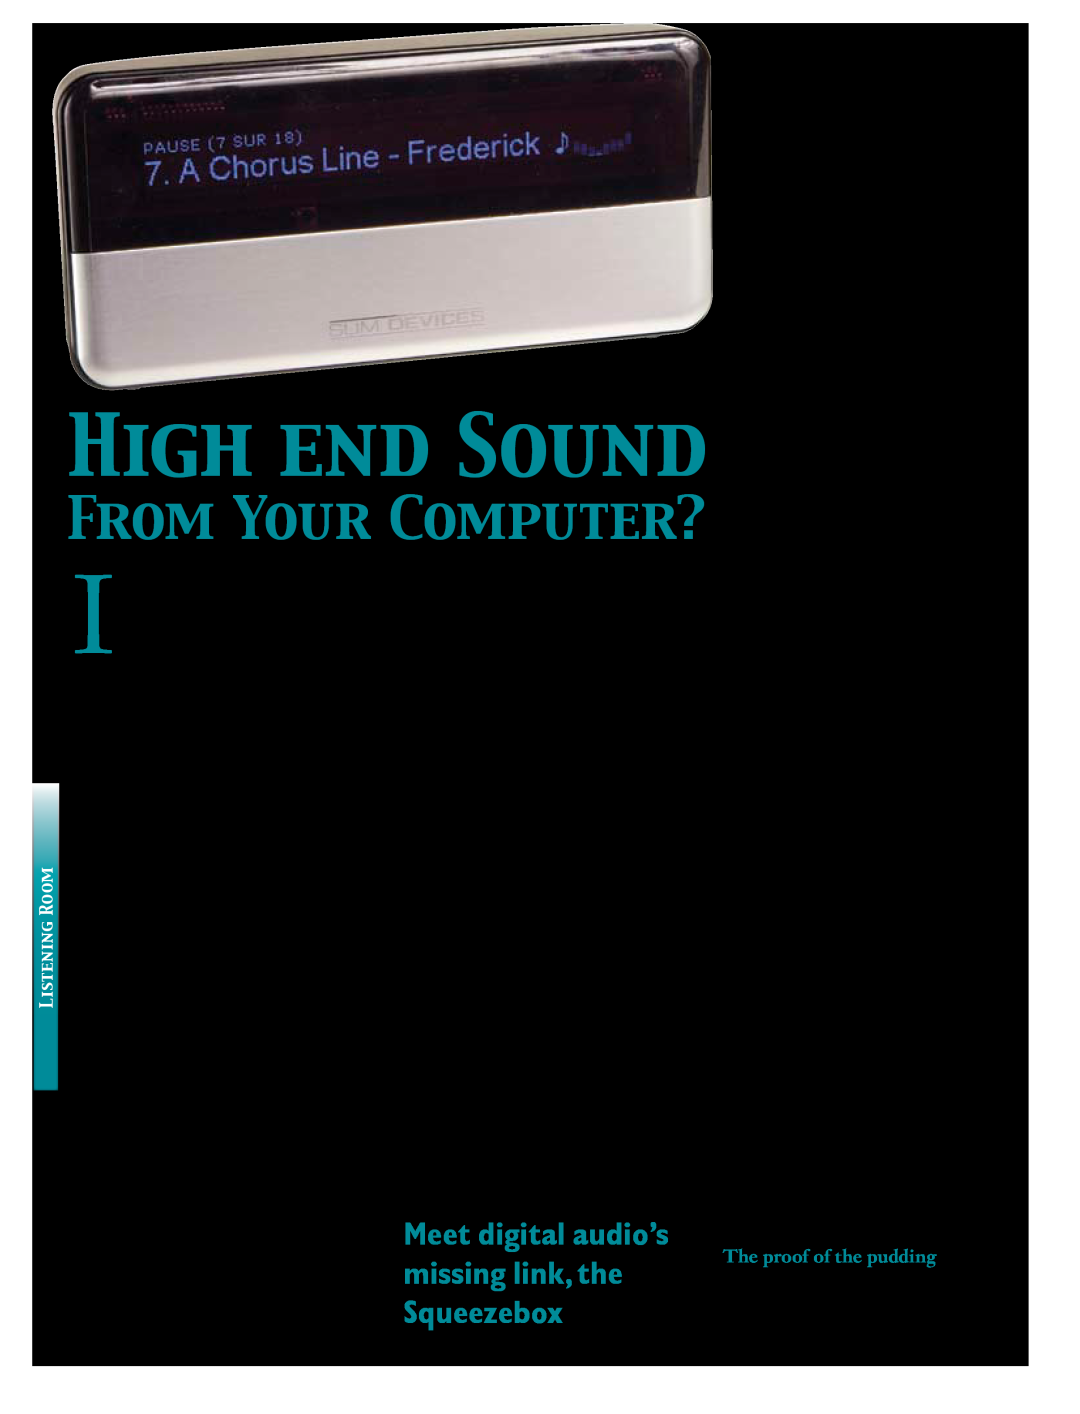 Koss 76 High End Sound, From Your Computer?, Meet digital audio’s missing link, the Squeezebox, The proof of the pudding 